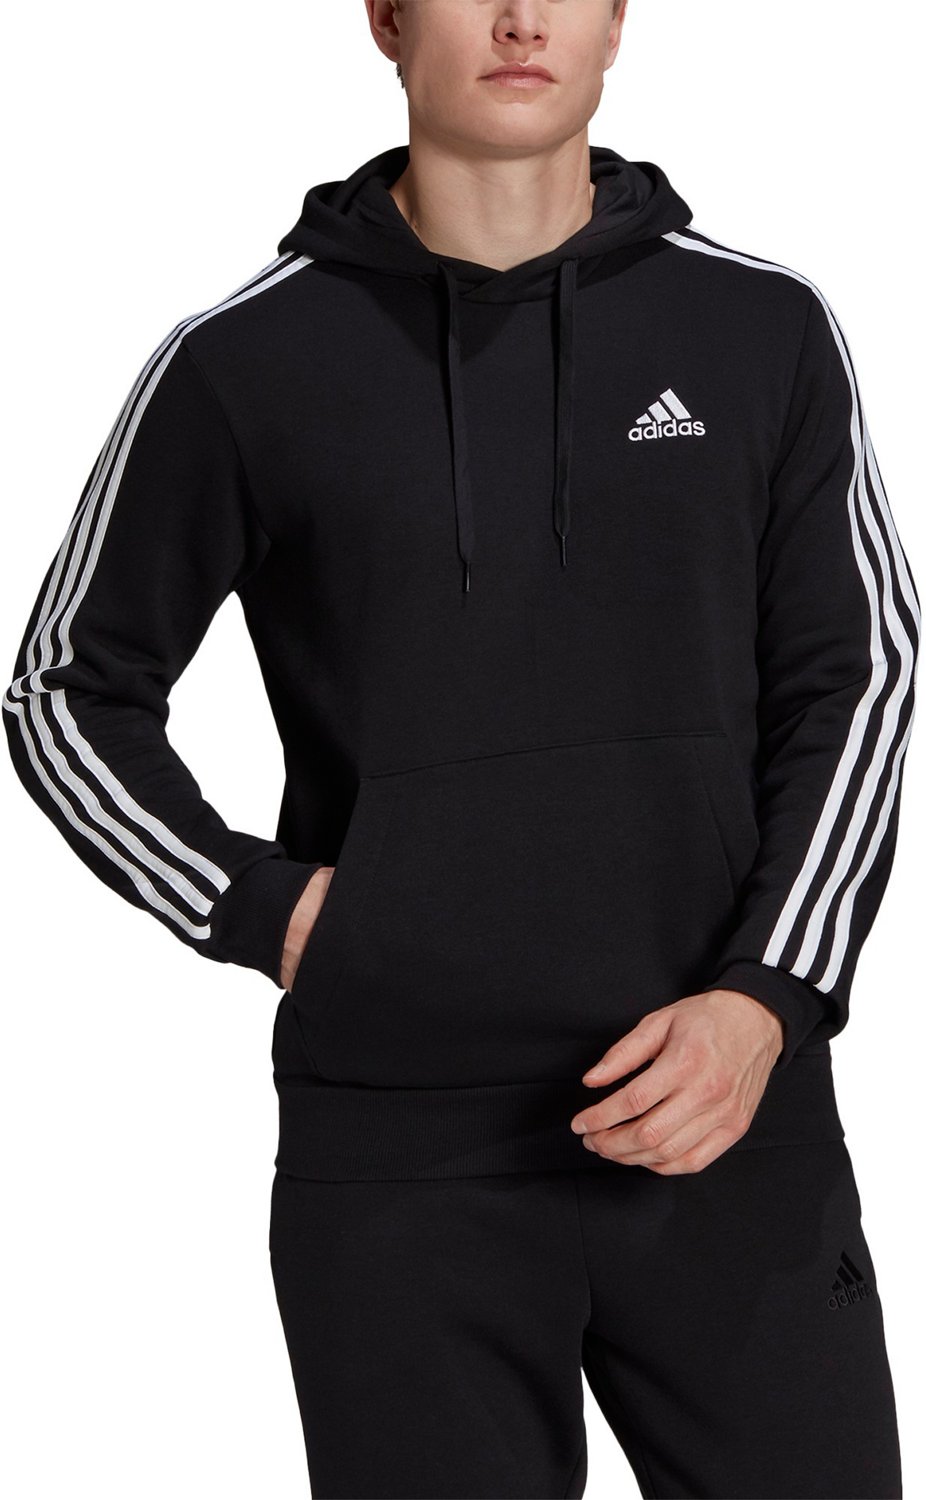 adidas Men's 3-Stripes Fleece Hoodie | Free Shipping at Academy